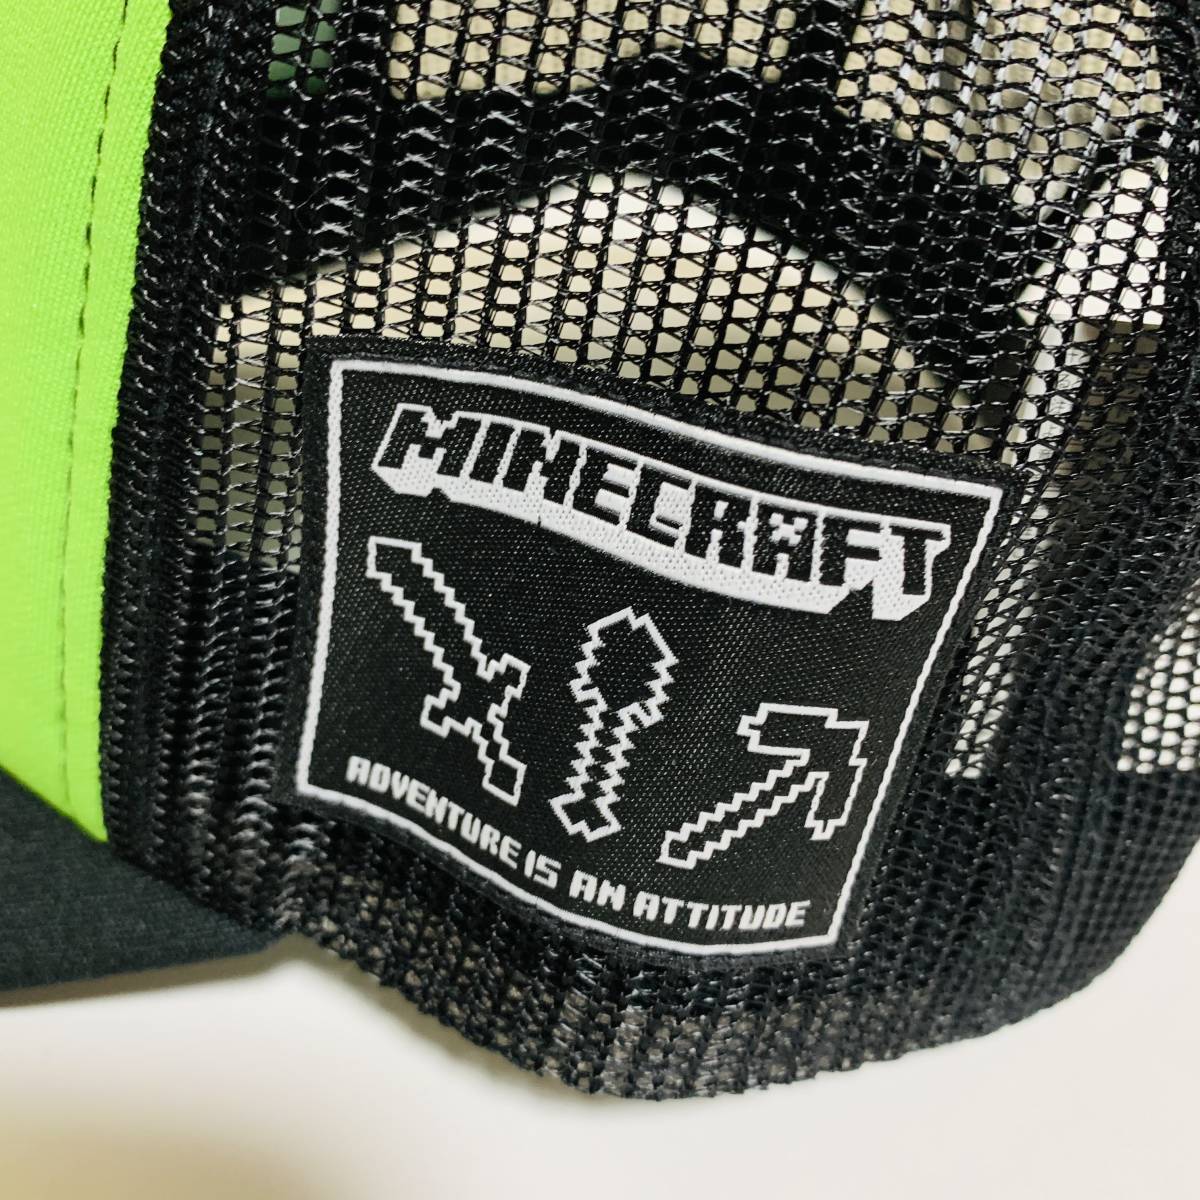 MINECRAFT( my n craft ) - Kid Micra for children Kids hat Kids creeper mesh snap back ( tag attaching not yet have on goods * new goods unused )